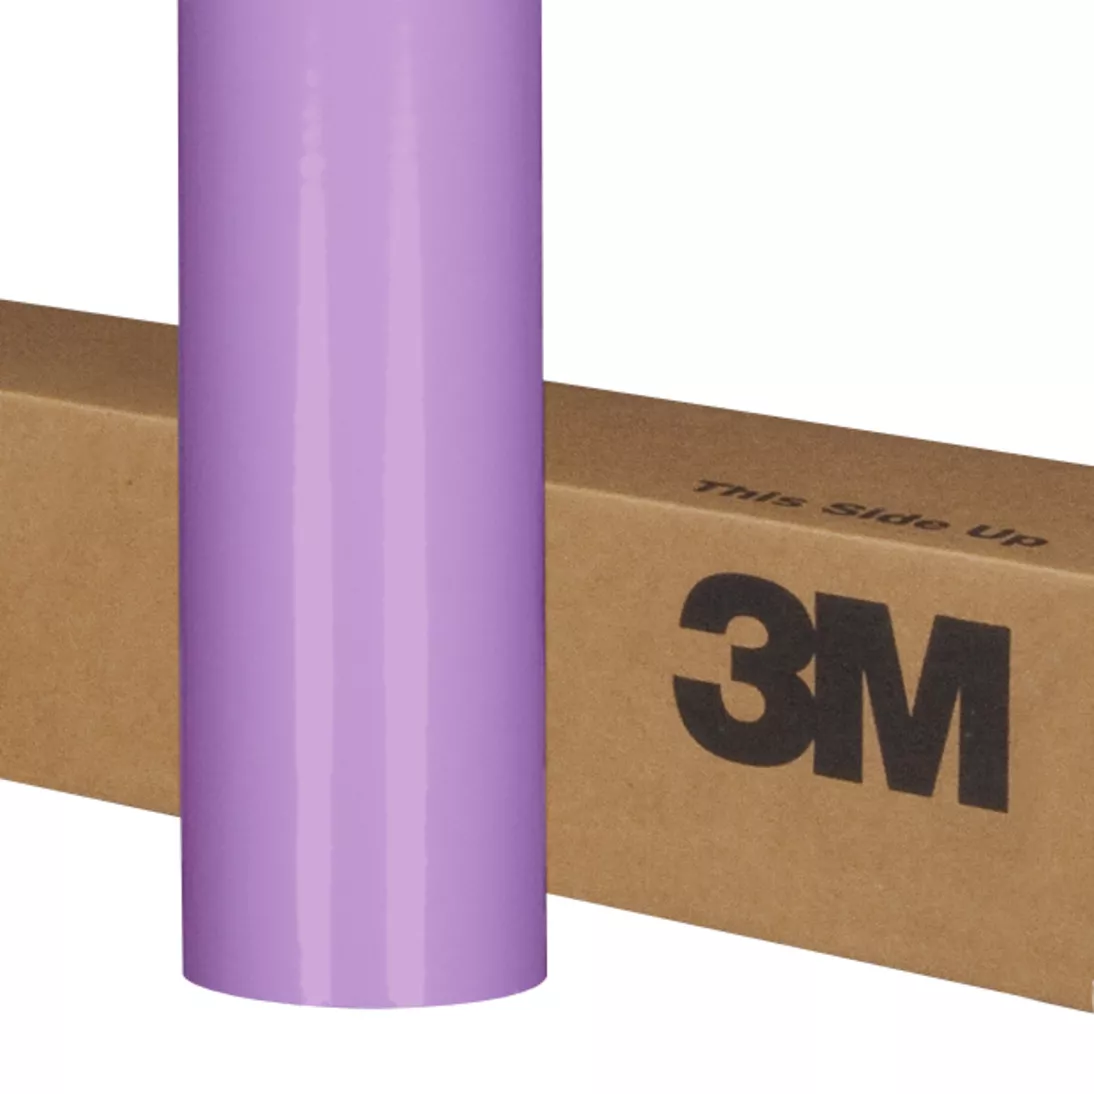 3M™ Scotchcal™ ElectroCut™ Graphic Film 7125-88, Violet, 24 in x 50 yd